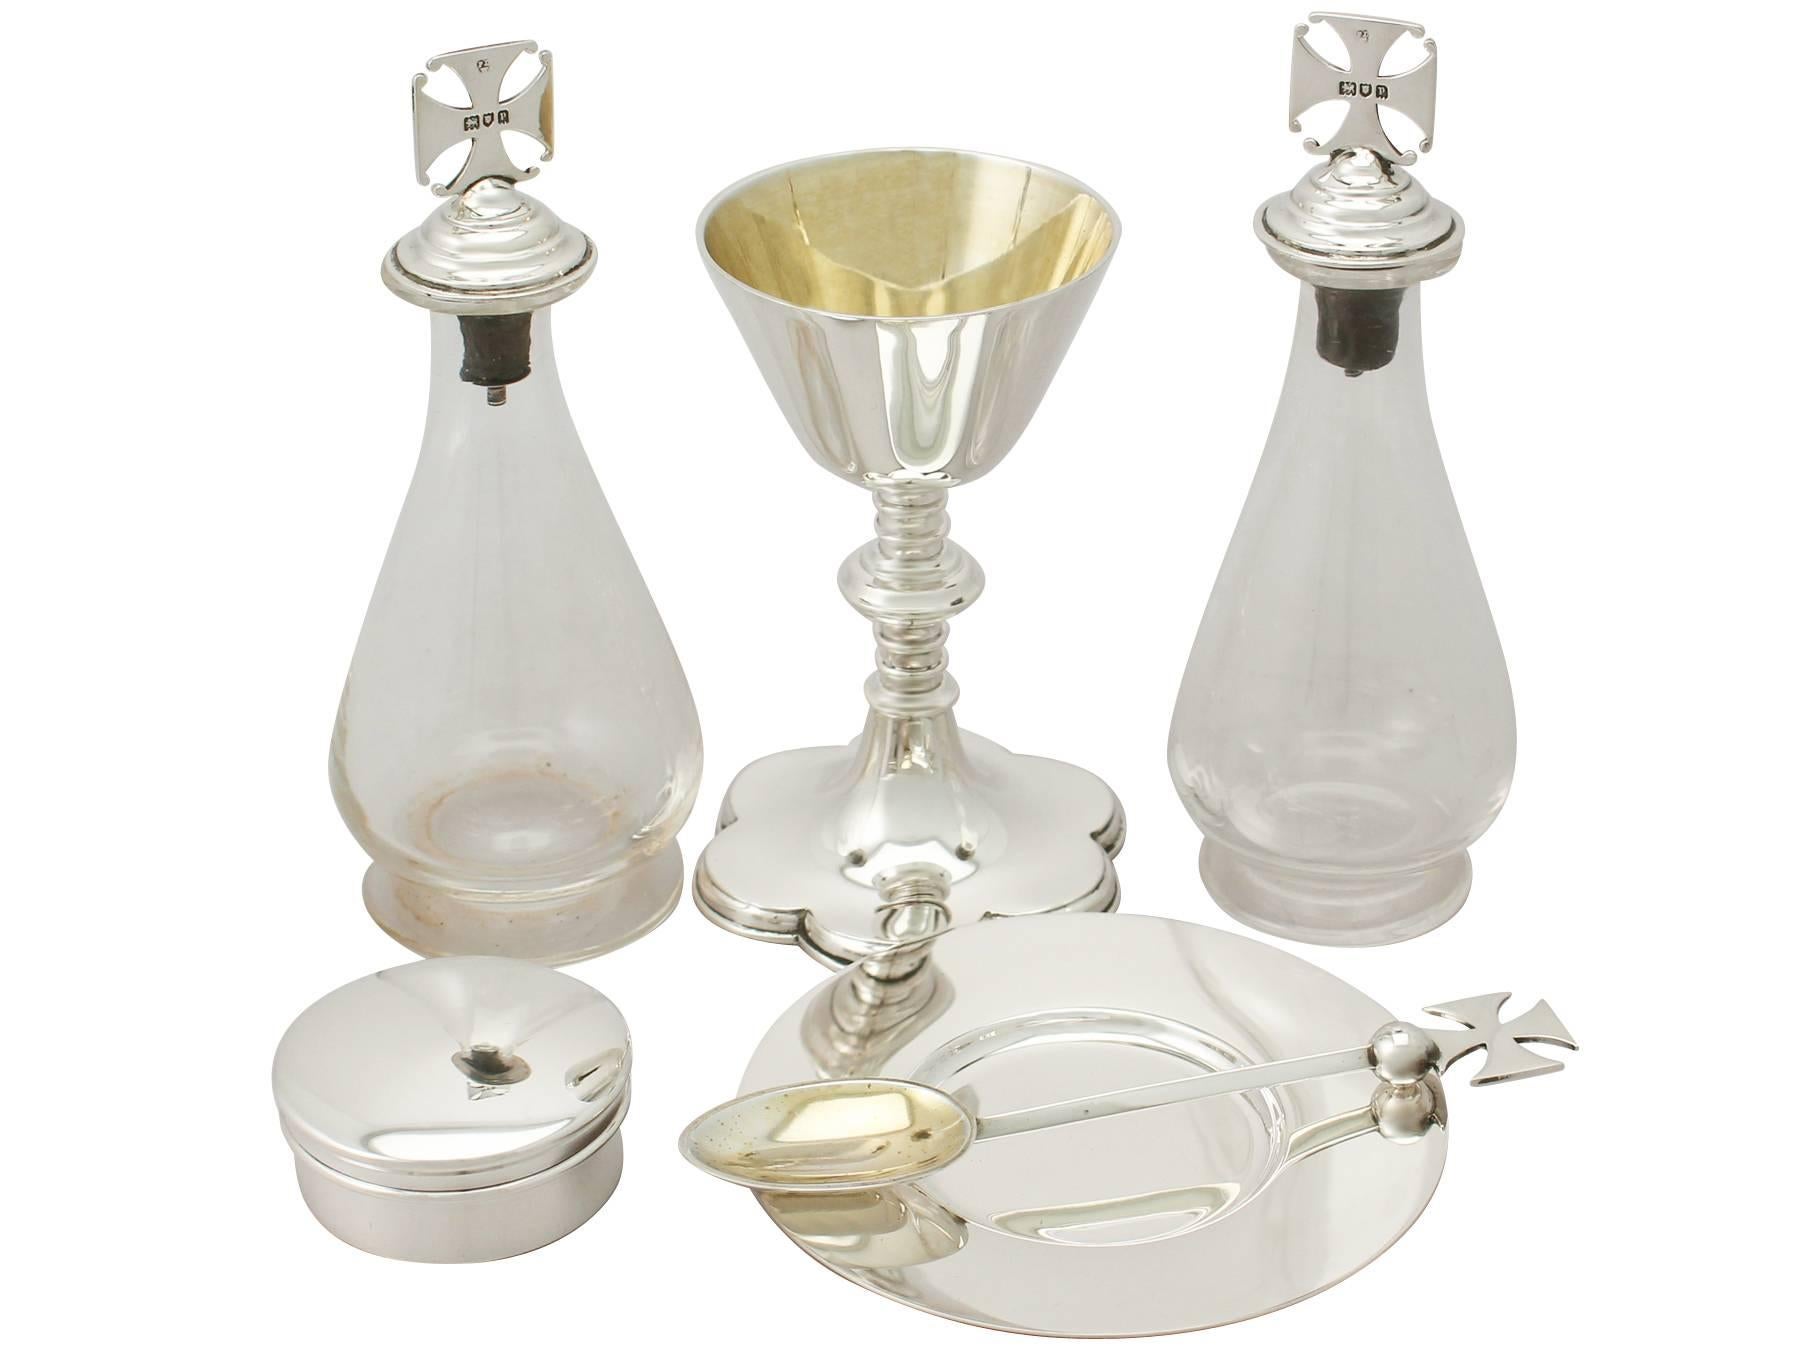 An exceptional, fine and impressive antique George V English sterling silver and glass communion set made by Reid & Sons; an addition to our diverse religious silverware collection.

This exceptional antique George V sterling silver communion set